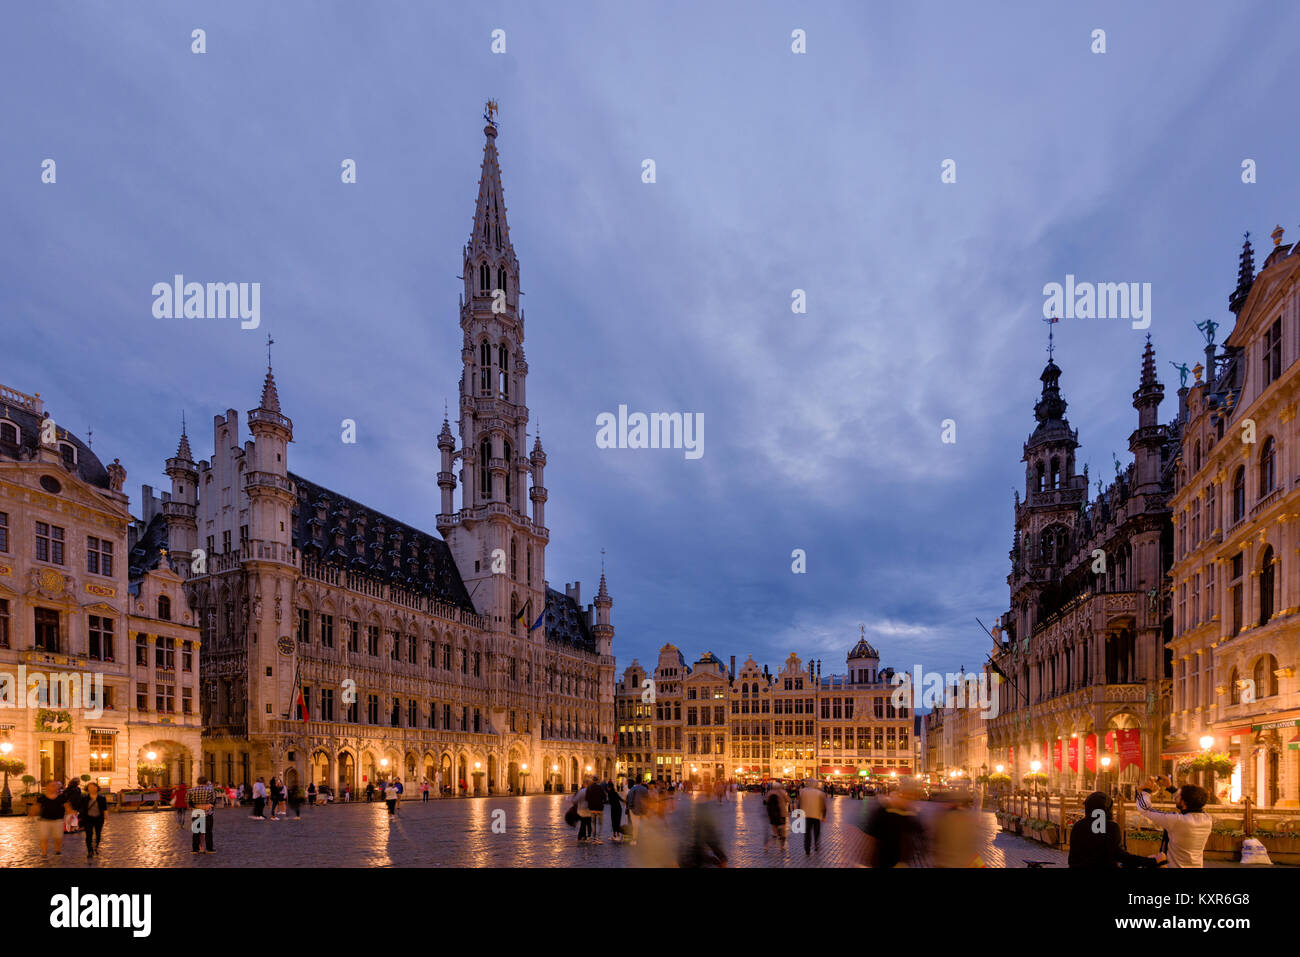 Brussel, Belgium,The Grand Place at night is surrounded by  guildhalls and two larger edifices, the city's Town Hall, and the  Breadhouse building Stock Photo